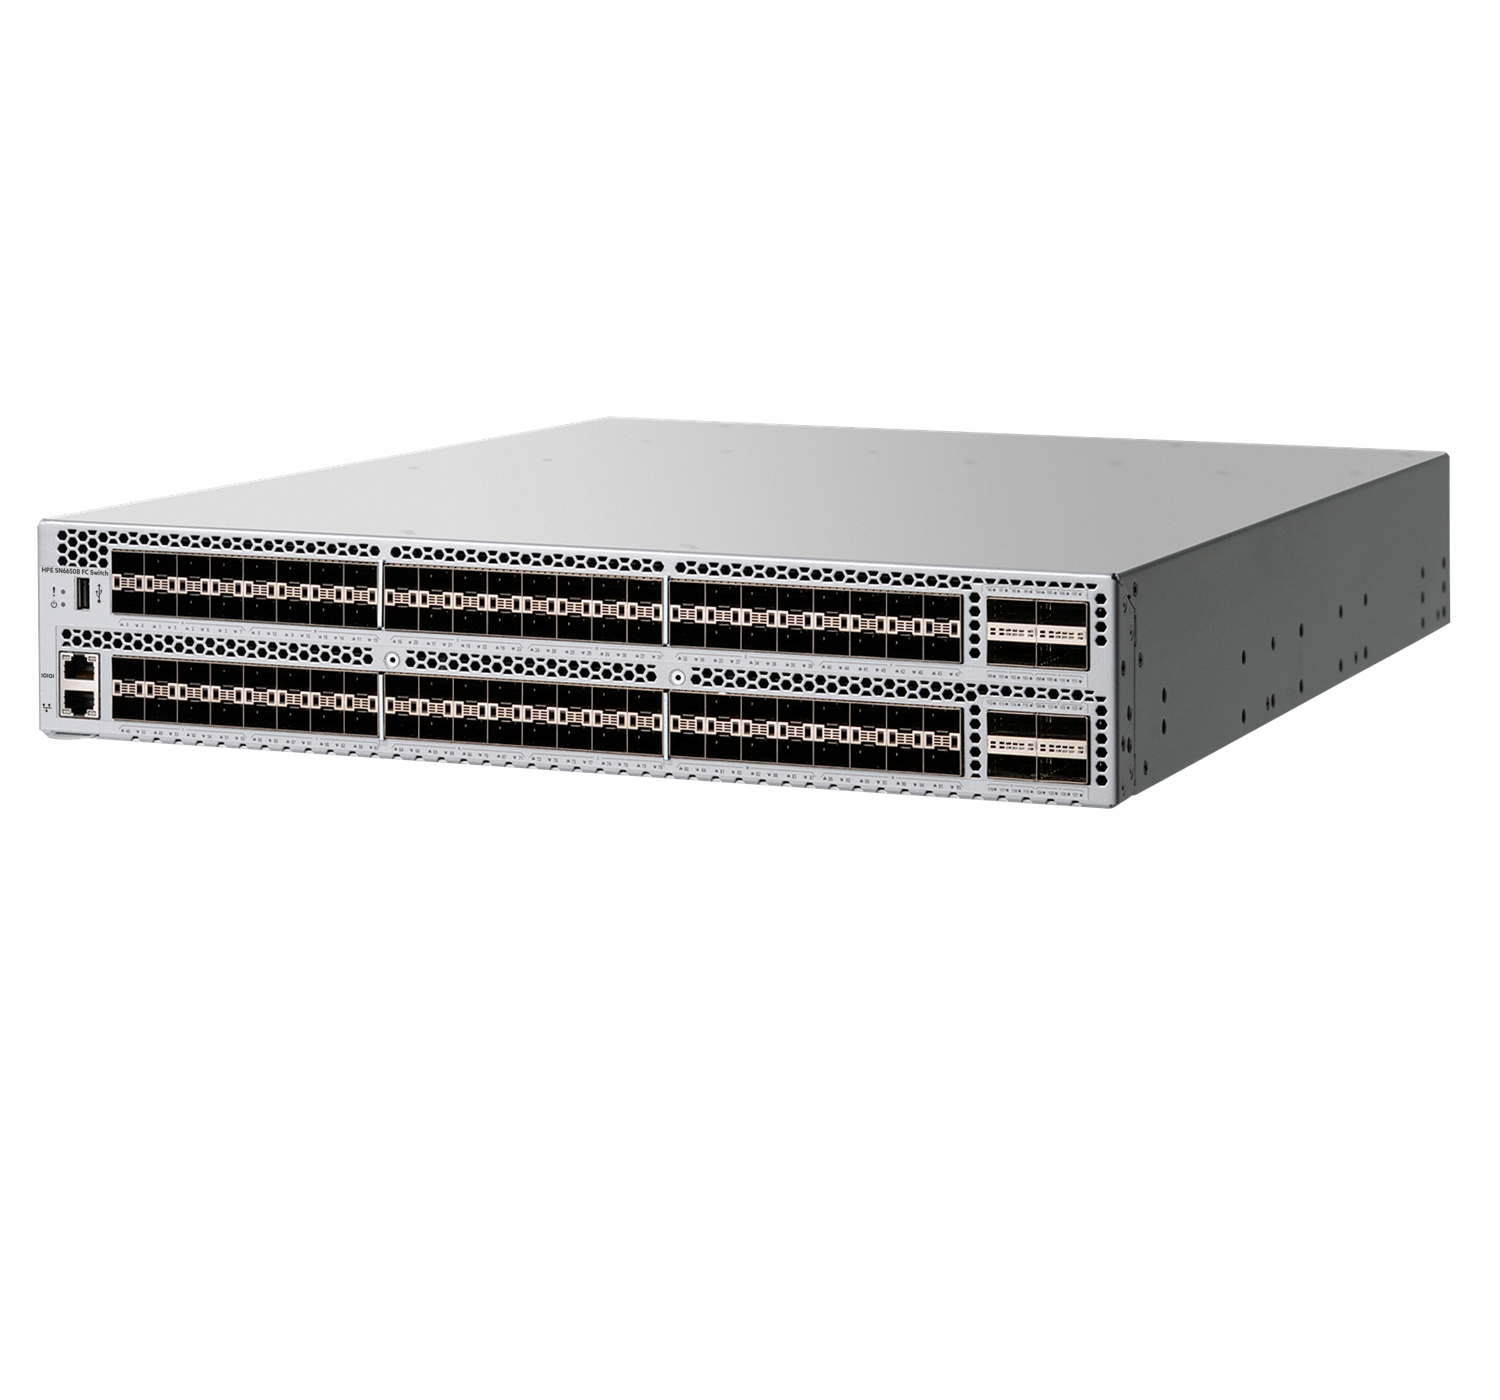 HPE StoreFabric SN6650B - Switch - managed - 48 x 32Gb Fibre Channel SFP+